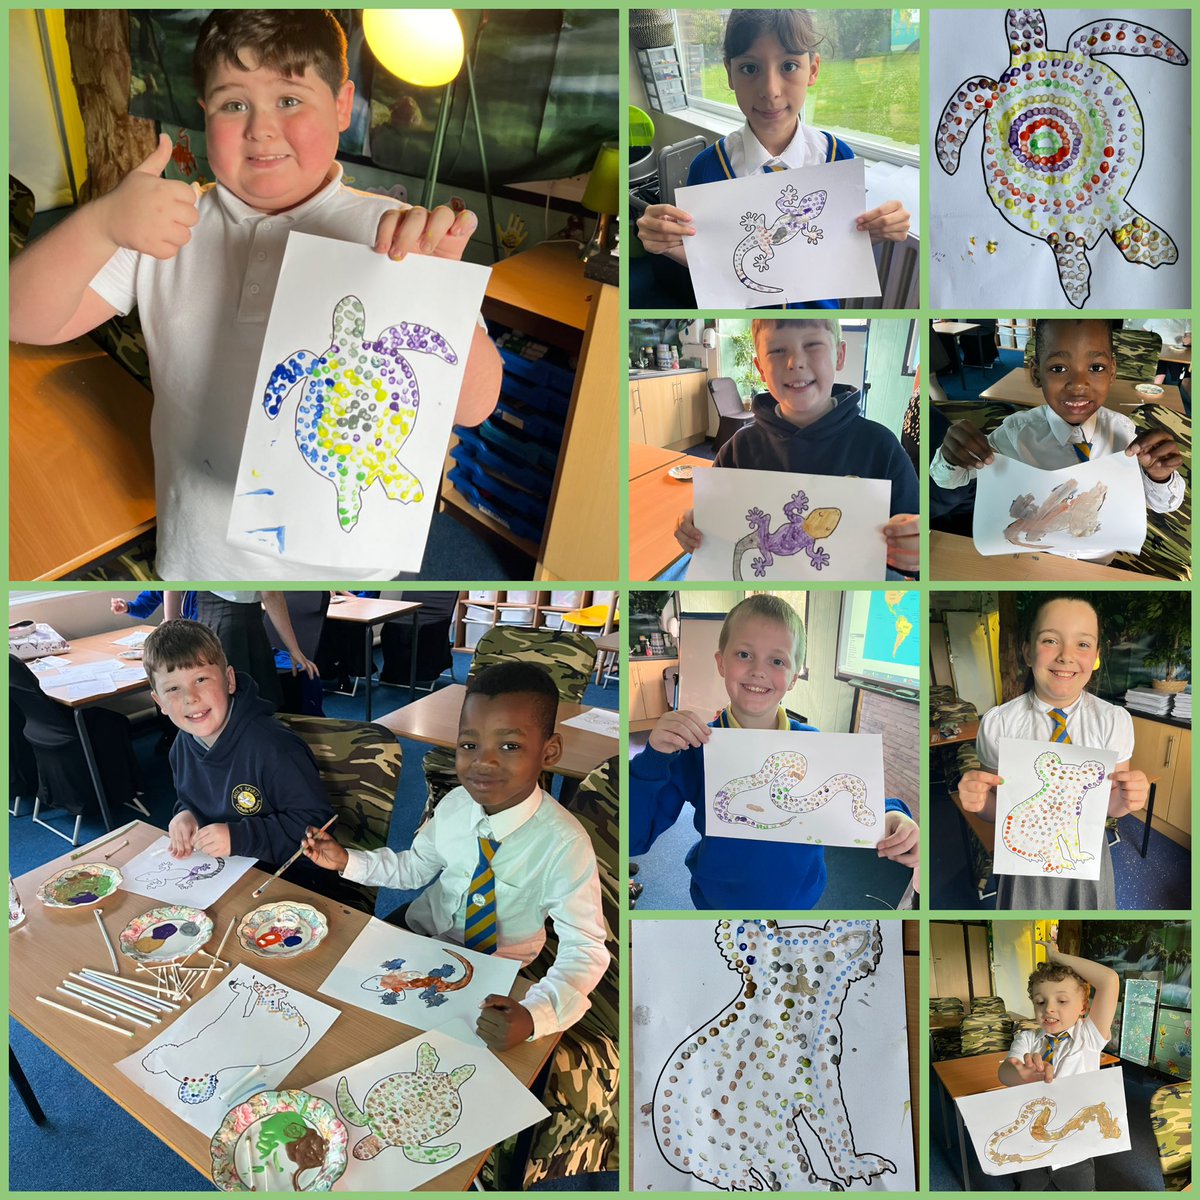 #Rainforest looked at spears taken 250 years ago from a group of Gweagal people, in Australia by a British explorer & his crew. We thought about what is special to us & created some aboriginal dot art 💙#BritishValues #ProtectedCharacteristics @HelpPicture @Schools_British